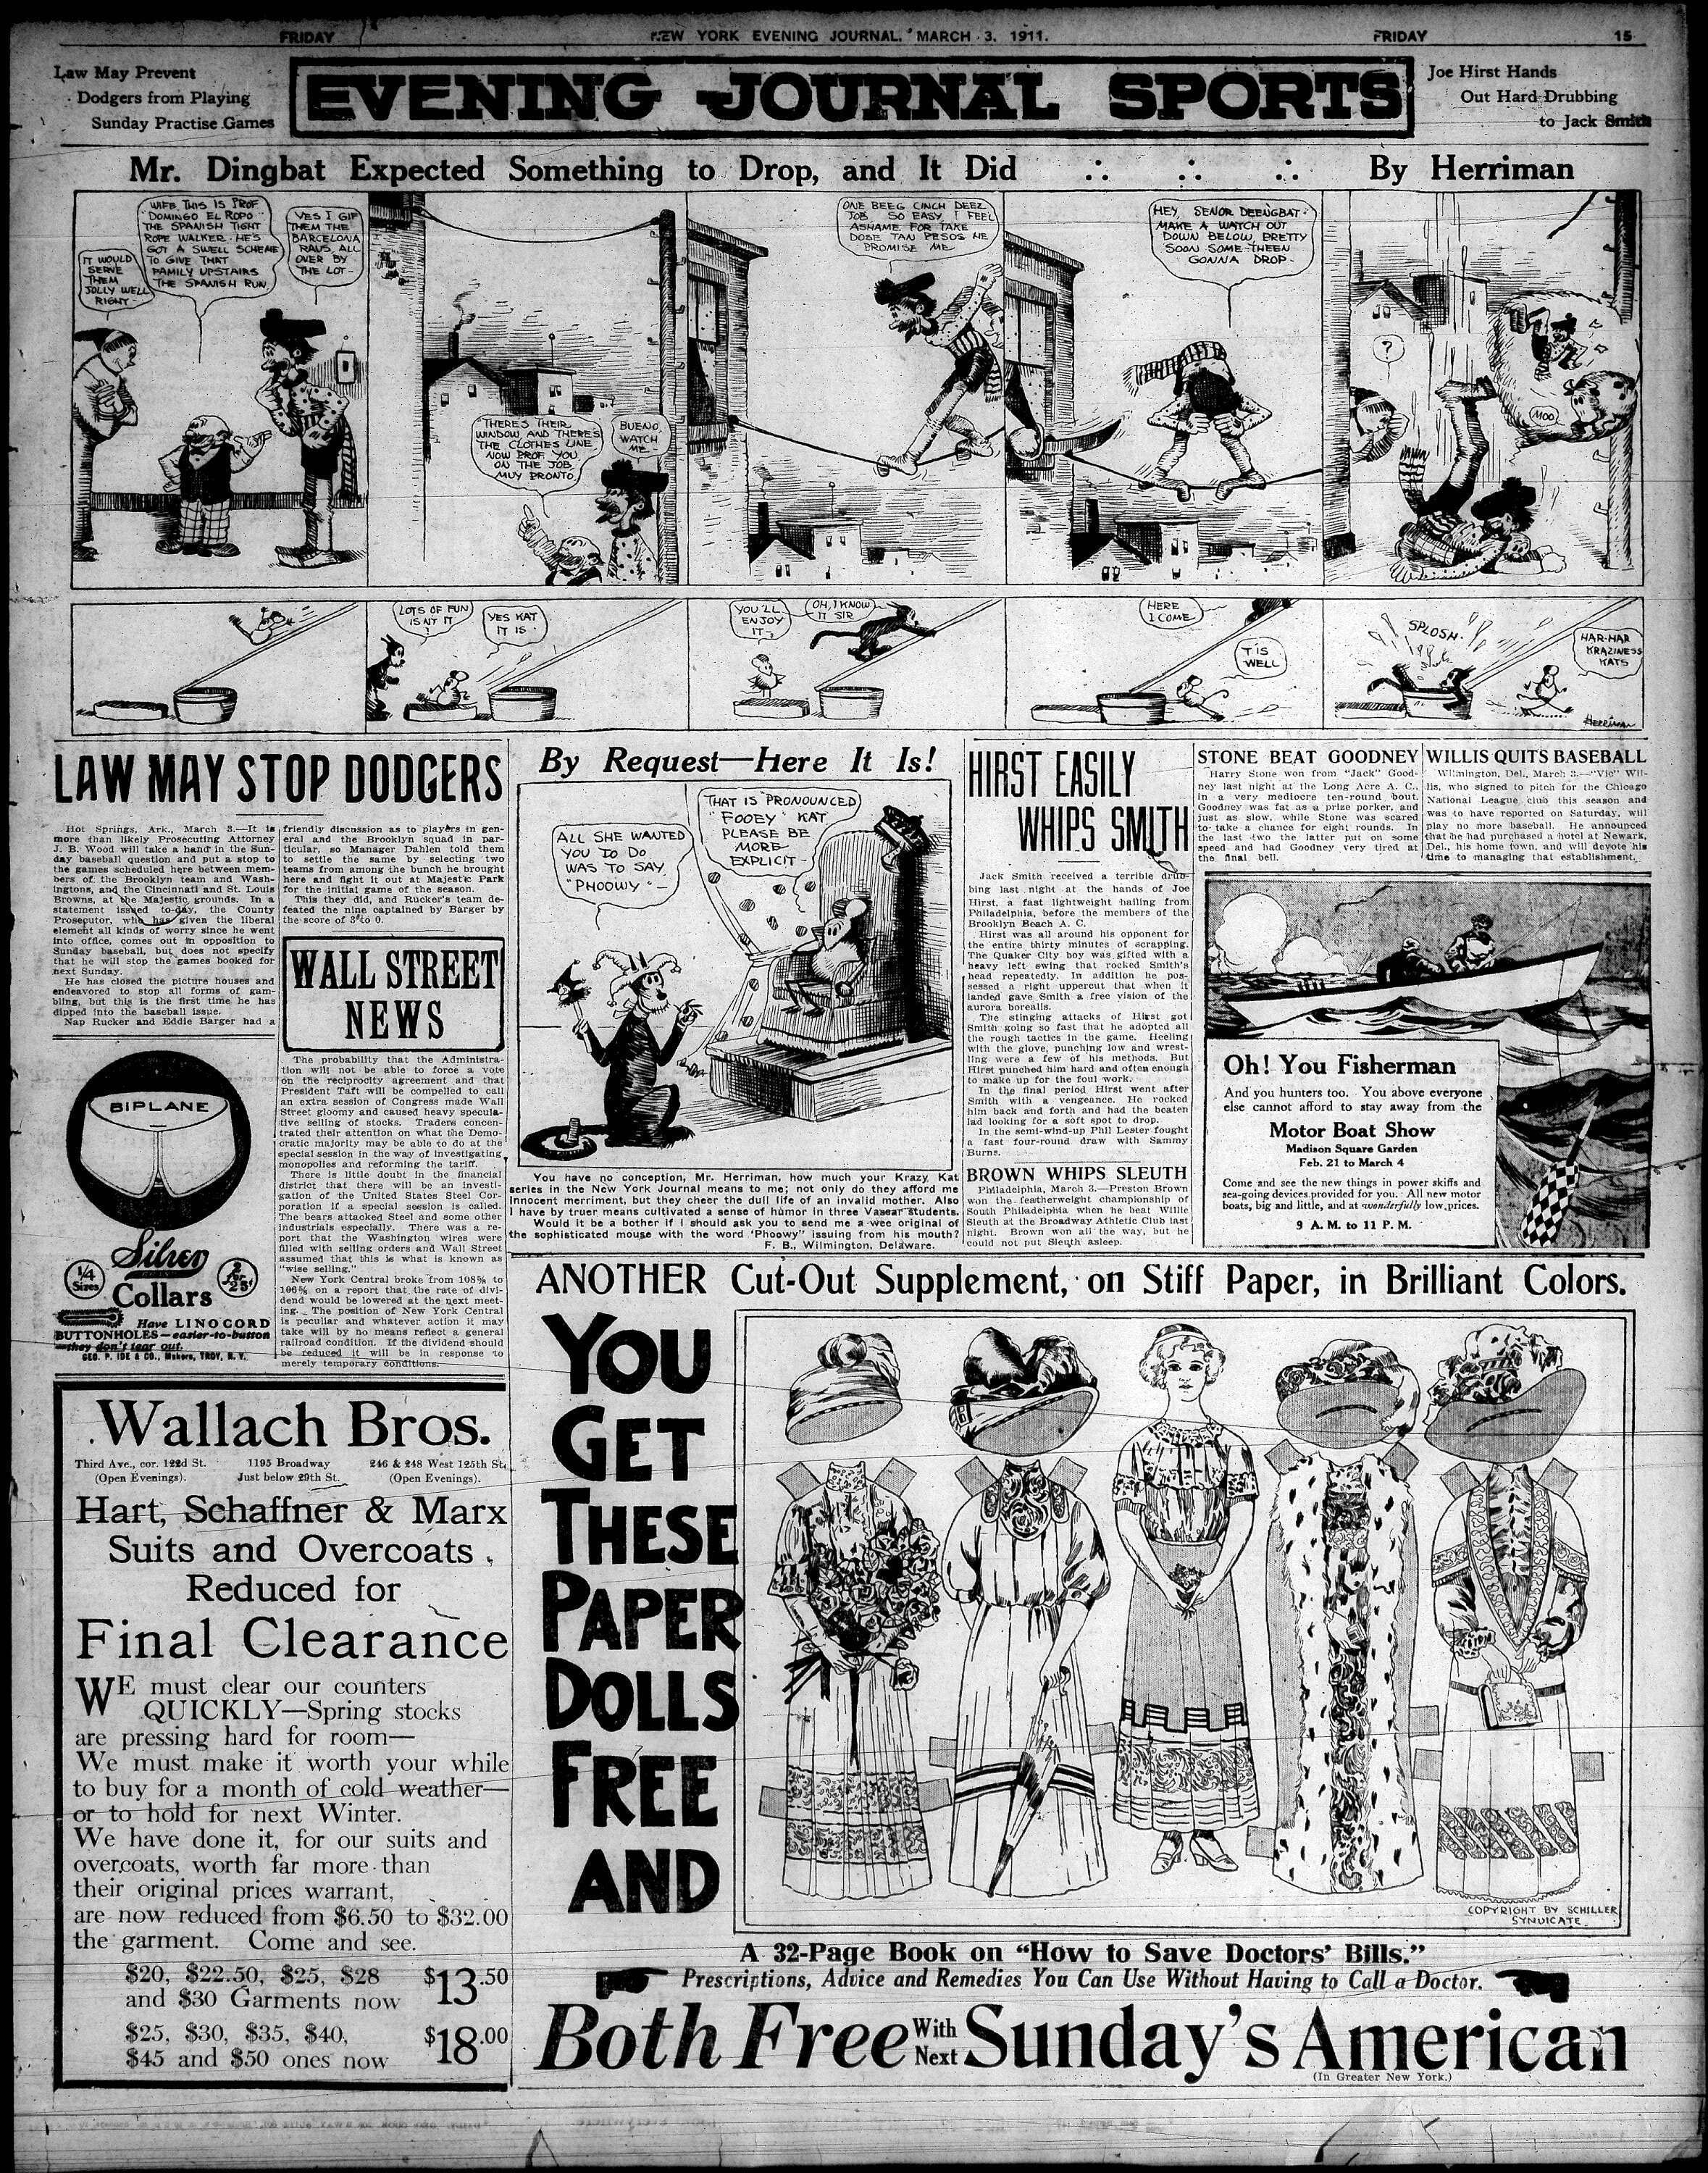 12-nyej-03-3-1911-sports-page-with-family-upstairs-and-extra-krazykat-.jpg